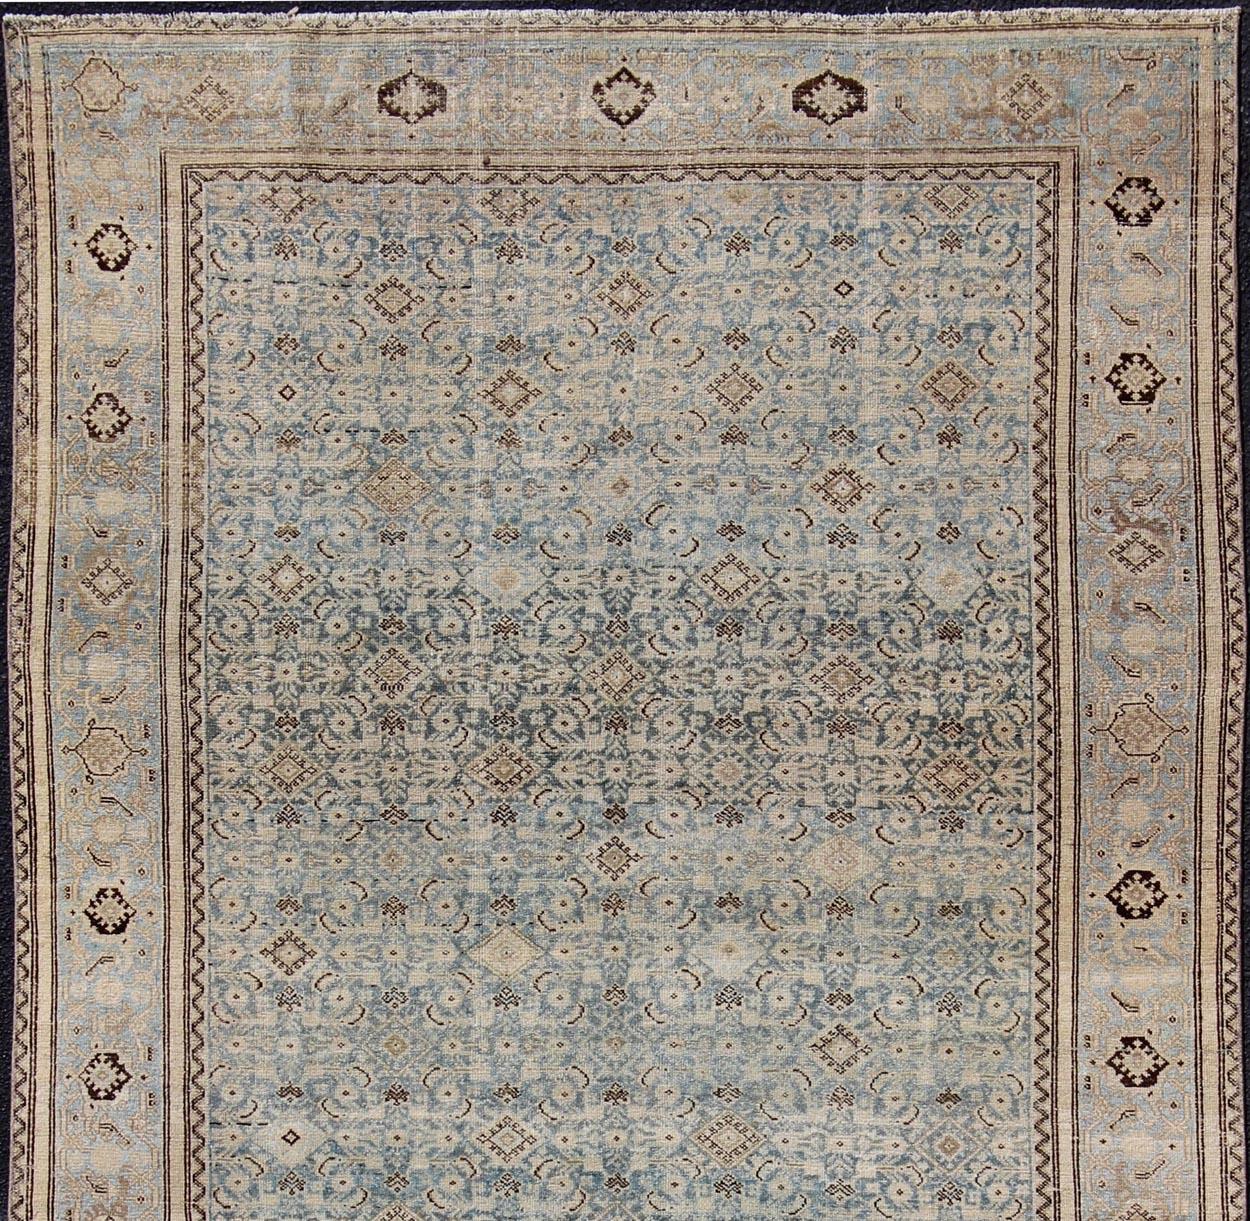 Intricately designed antique Malayer gallery in light tones, rug SUS-2002-1, country of origin / type: Iran / Malayer, circa 1910.

This beautiful antique Malayer runner from Persia features an elaborate all-over design, consisting of a variety of